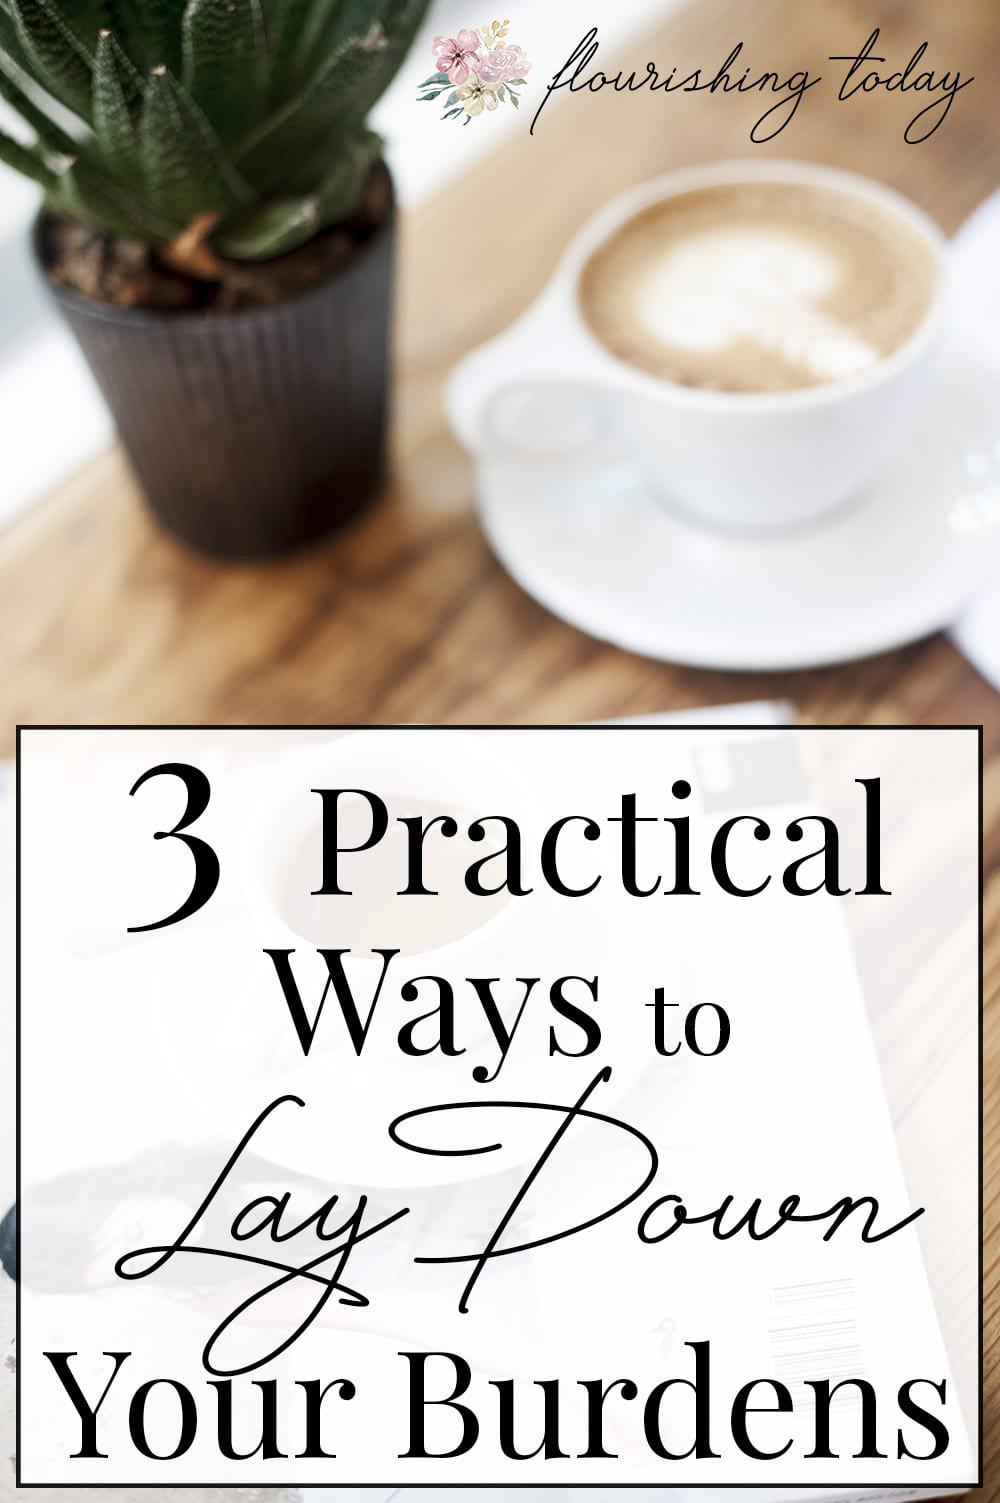 Are you overwhelmed by the burdens you carry? If you are feeling the heaviness from your load, join us for 3 Practical ways to lay down your burdens. #burdens #laydownyourburdens #overwhelm #overcome #stress